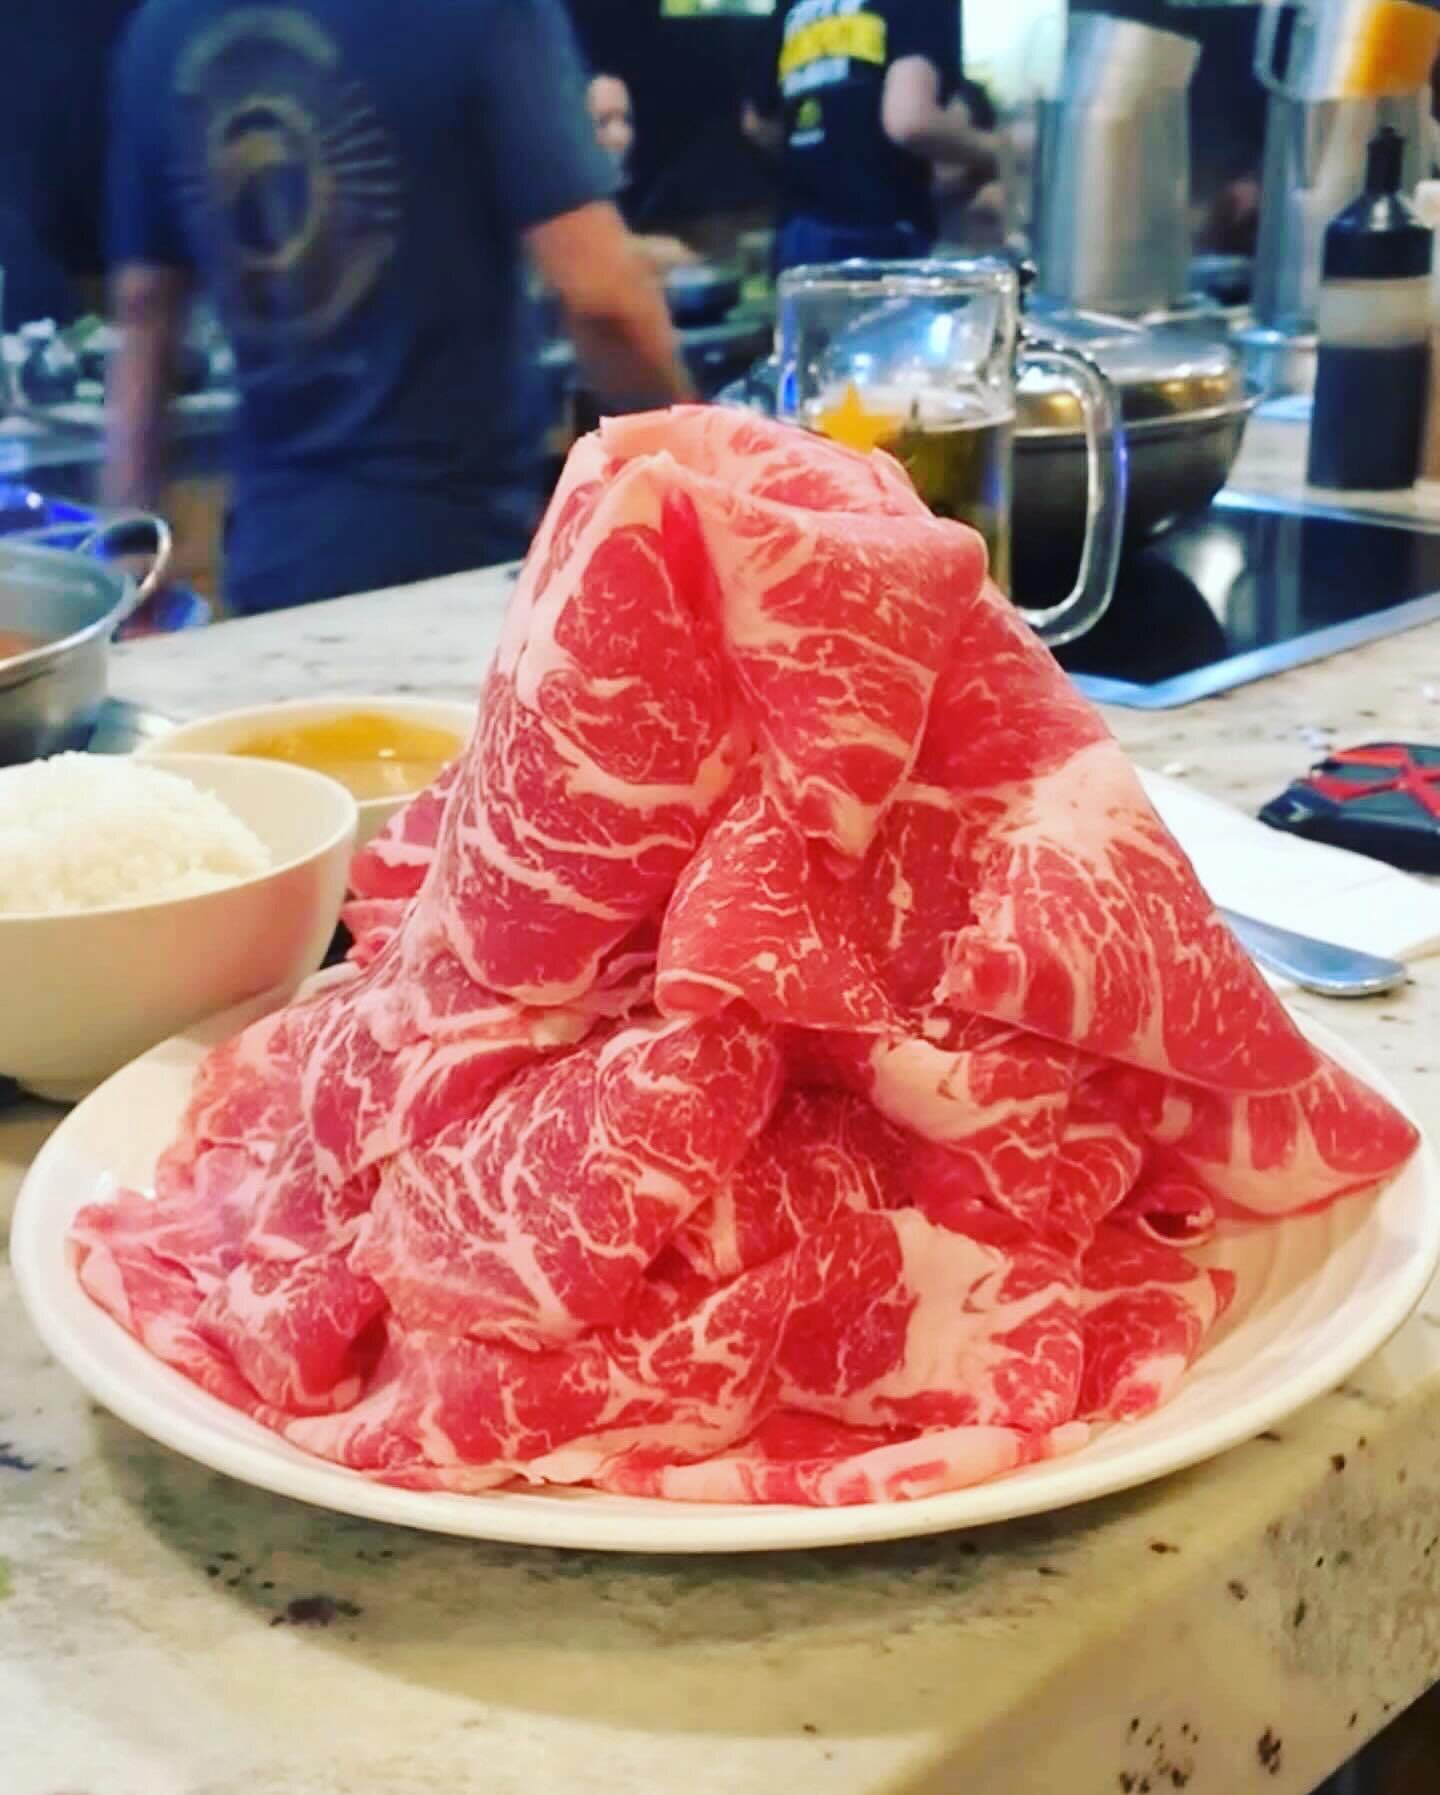 Indulge in a feast fit for a king with our King Kong Size Prime Beef Ribeye, exclusively at California . Elevate your shabu shabu experience to royal heights! 🥩👑 #KingSizeFlavor #ShabuShabuRoyalty